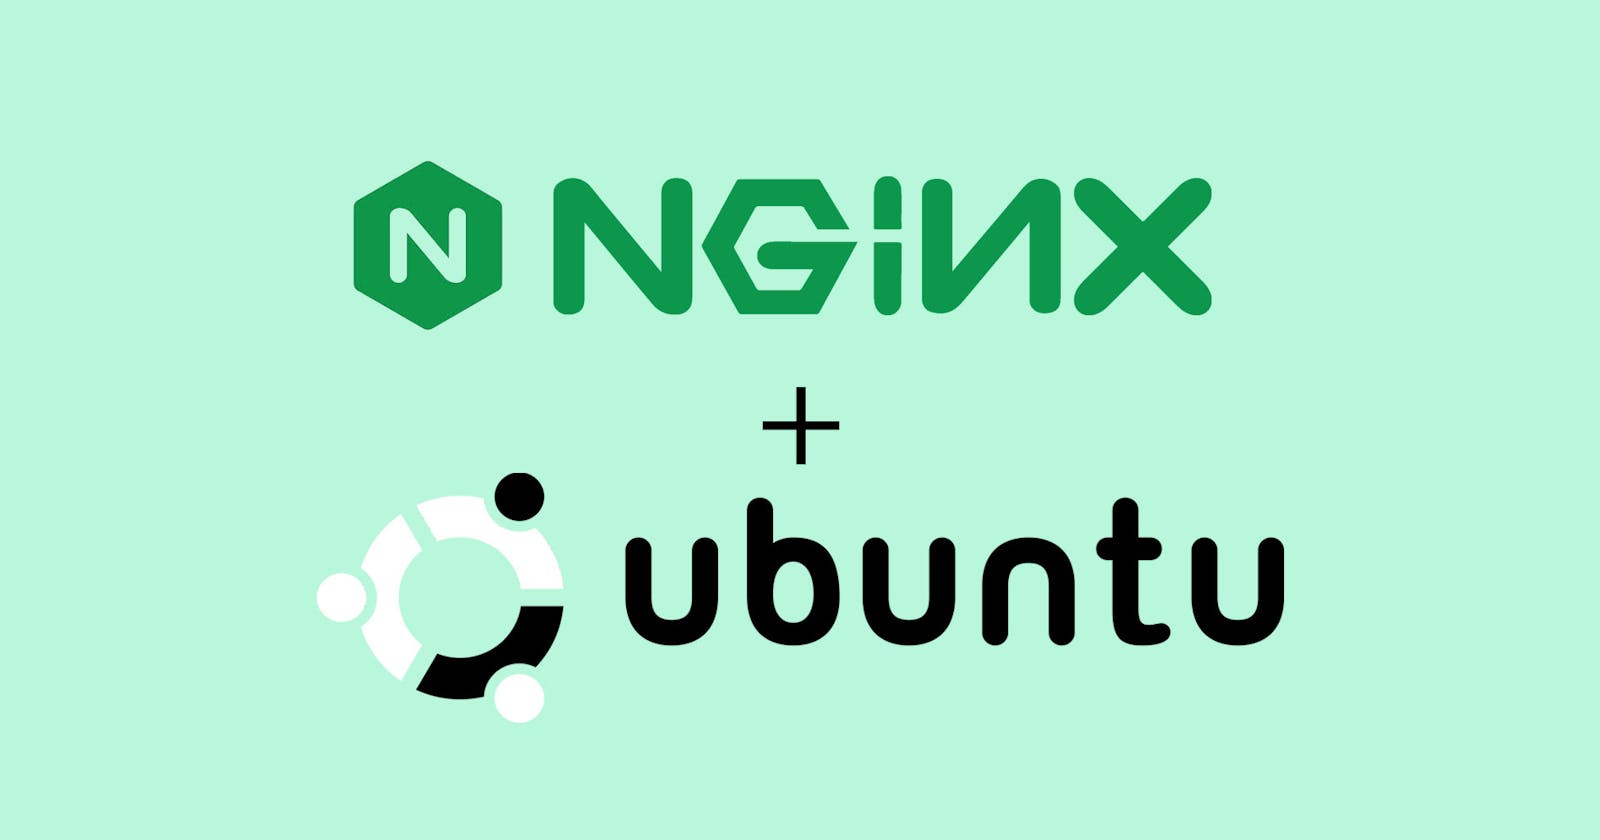 Set up NGINX with SSL on a Ubuntu server to serve static pages.